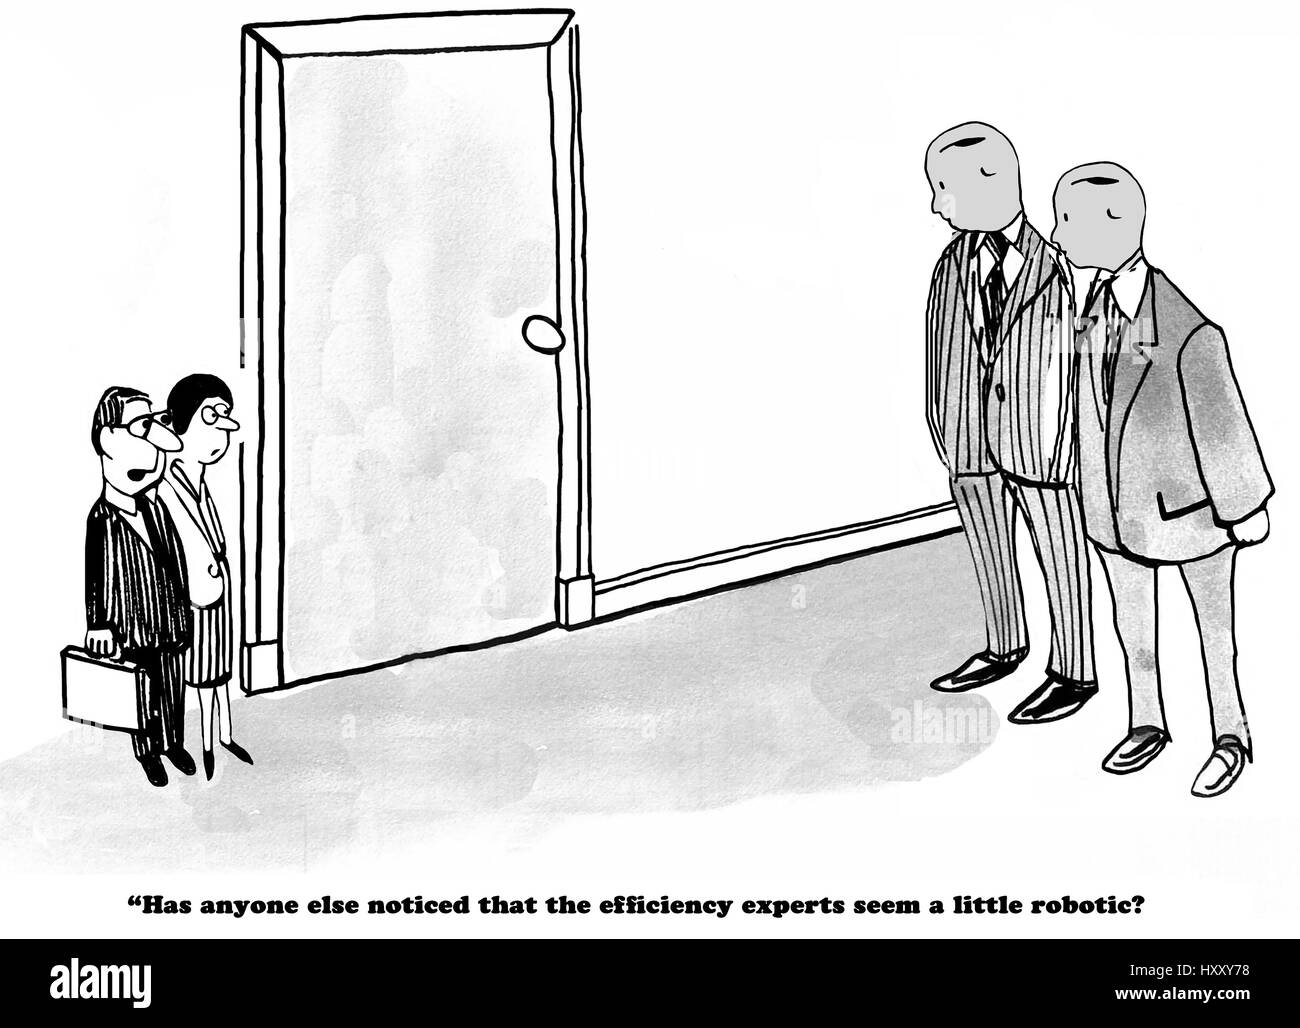 Business cartoon about the efficiency experts seeming robotic. Stock Photo